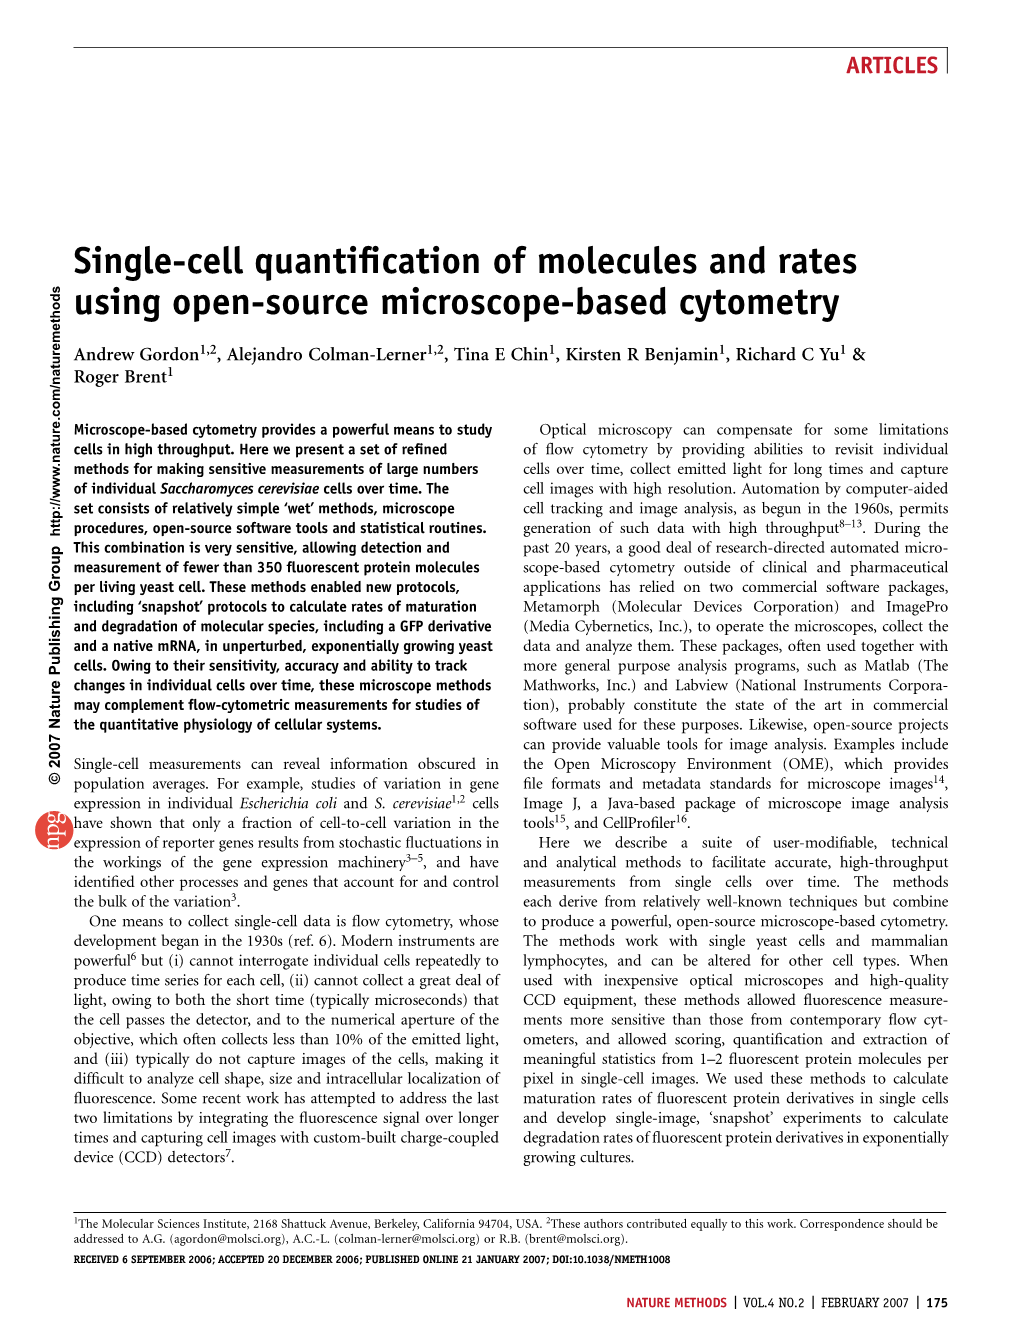 Single-Cell Quantification of Molecules and Rates Using Open-Source